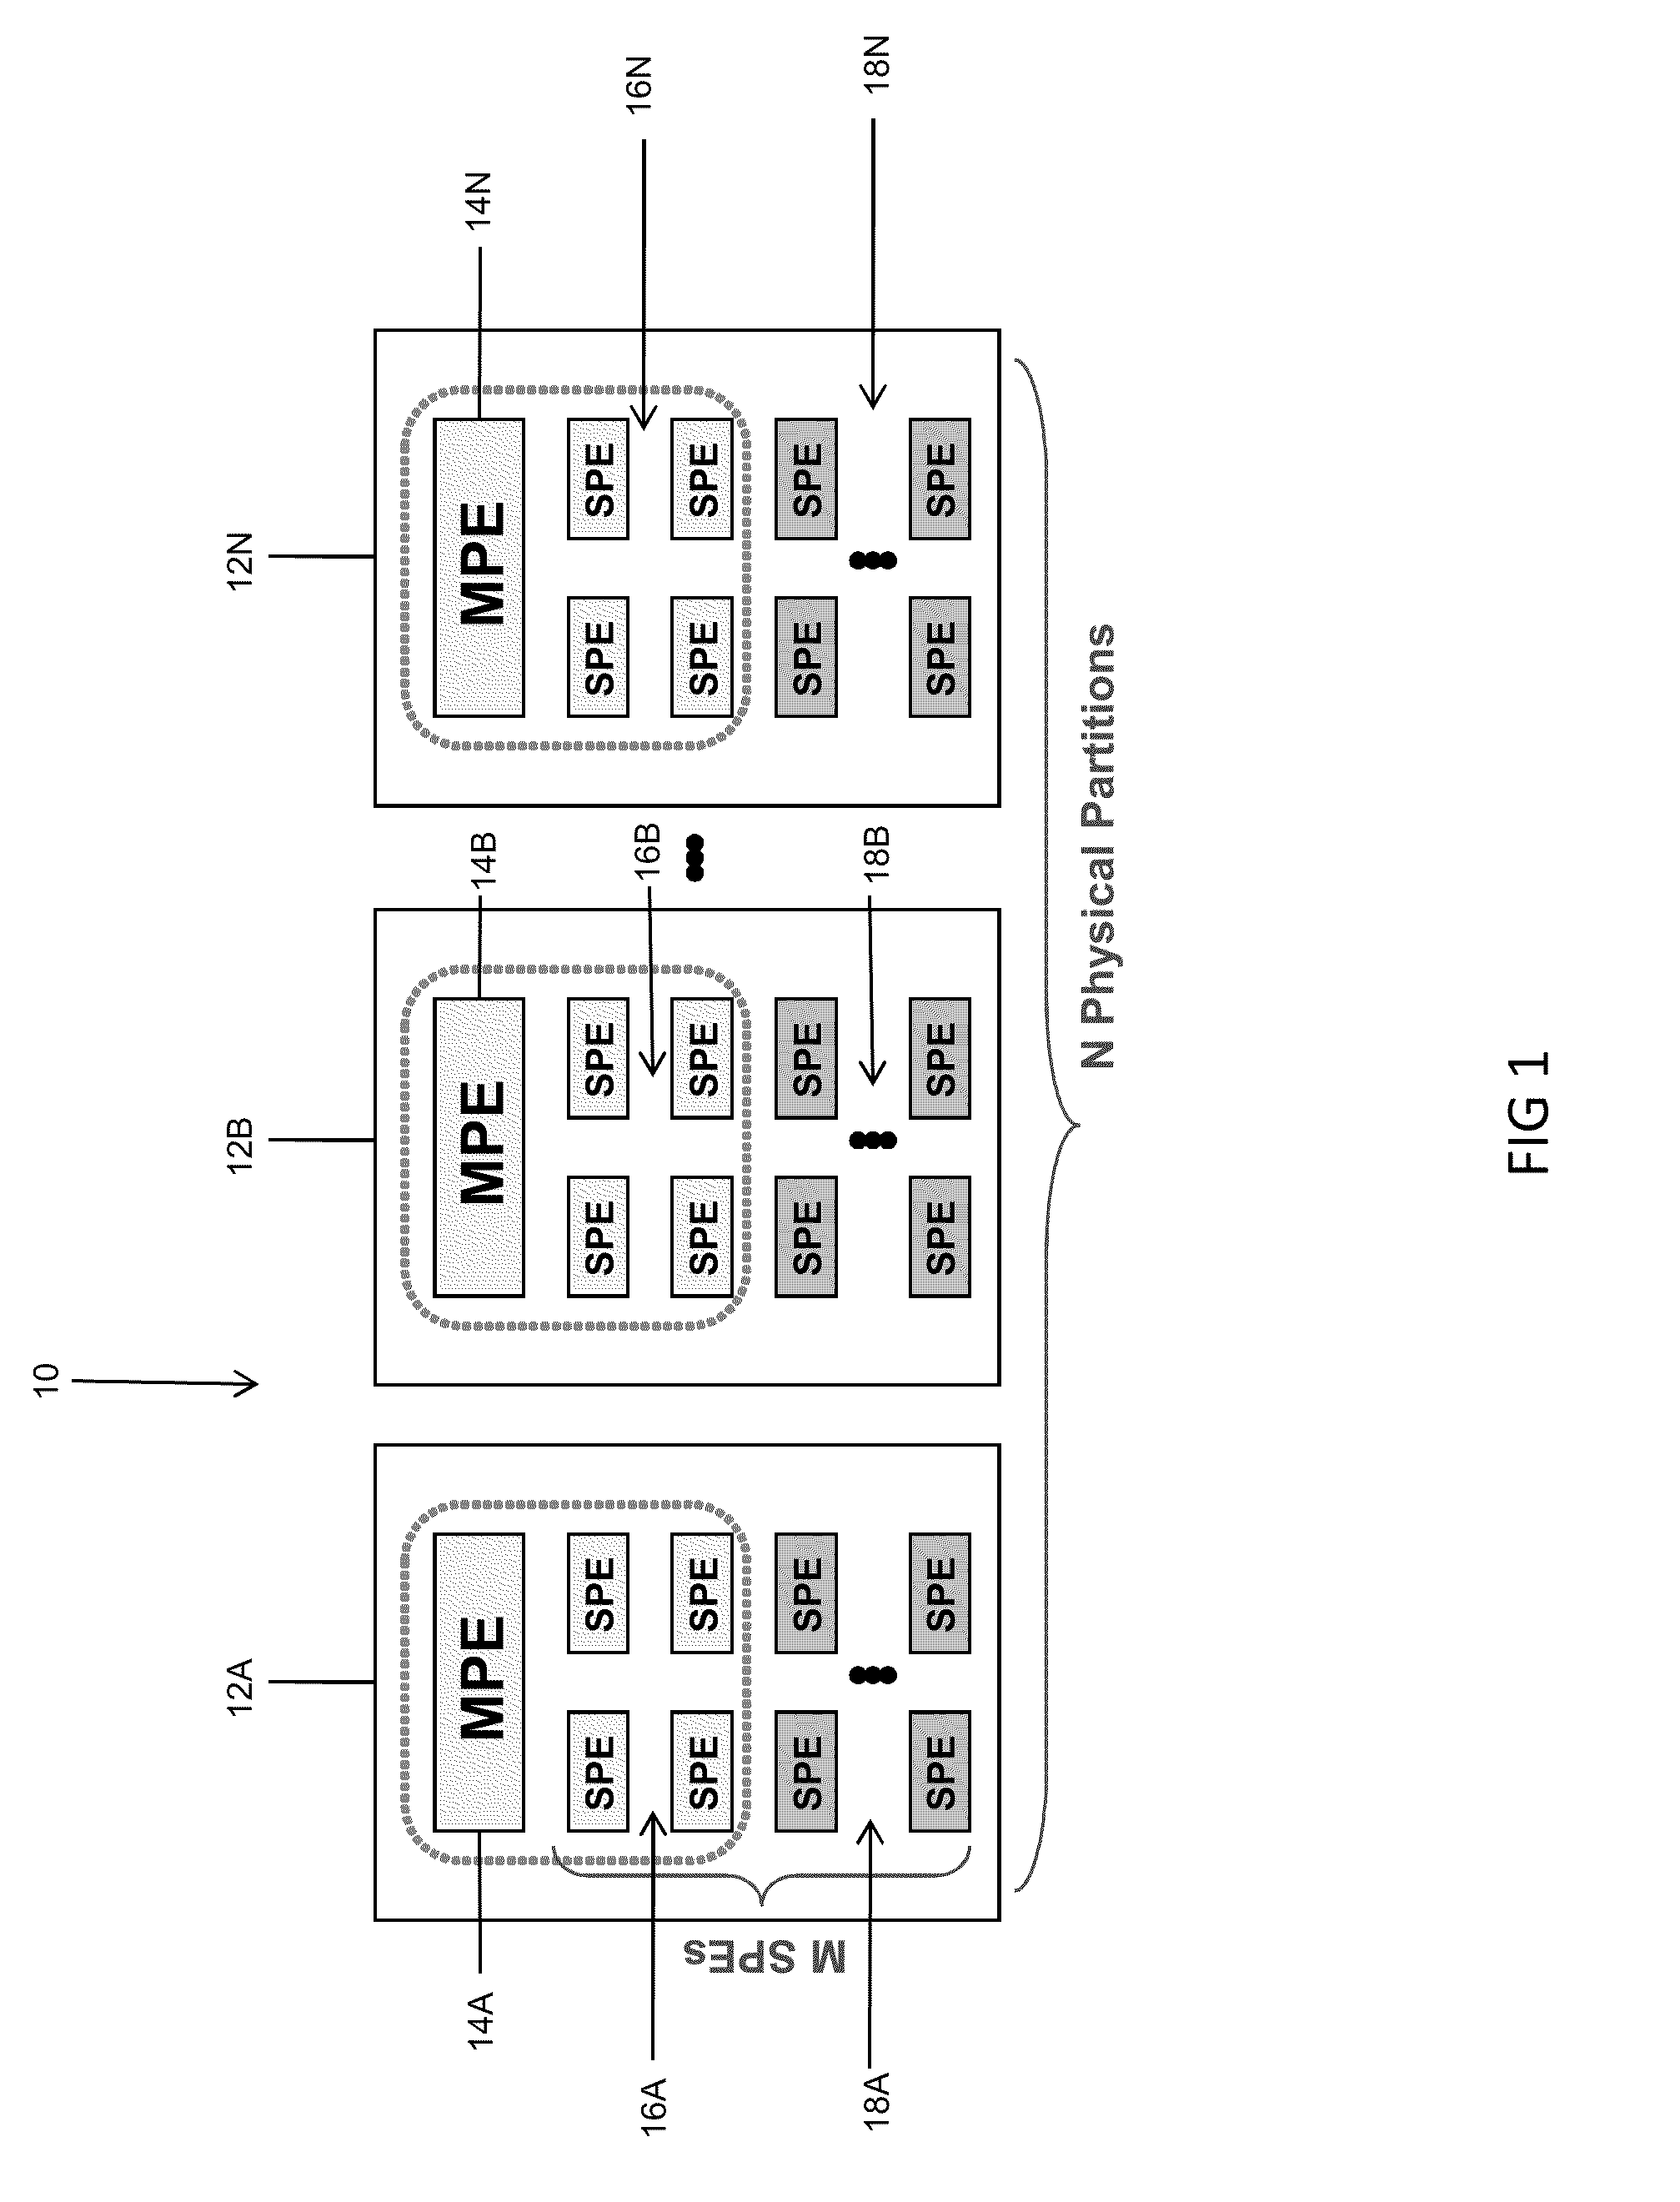 Virtualization across physical partitions of a multi-core processor (MCP)